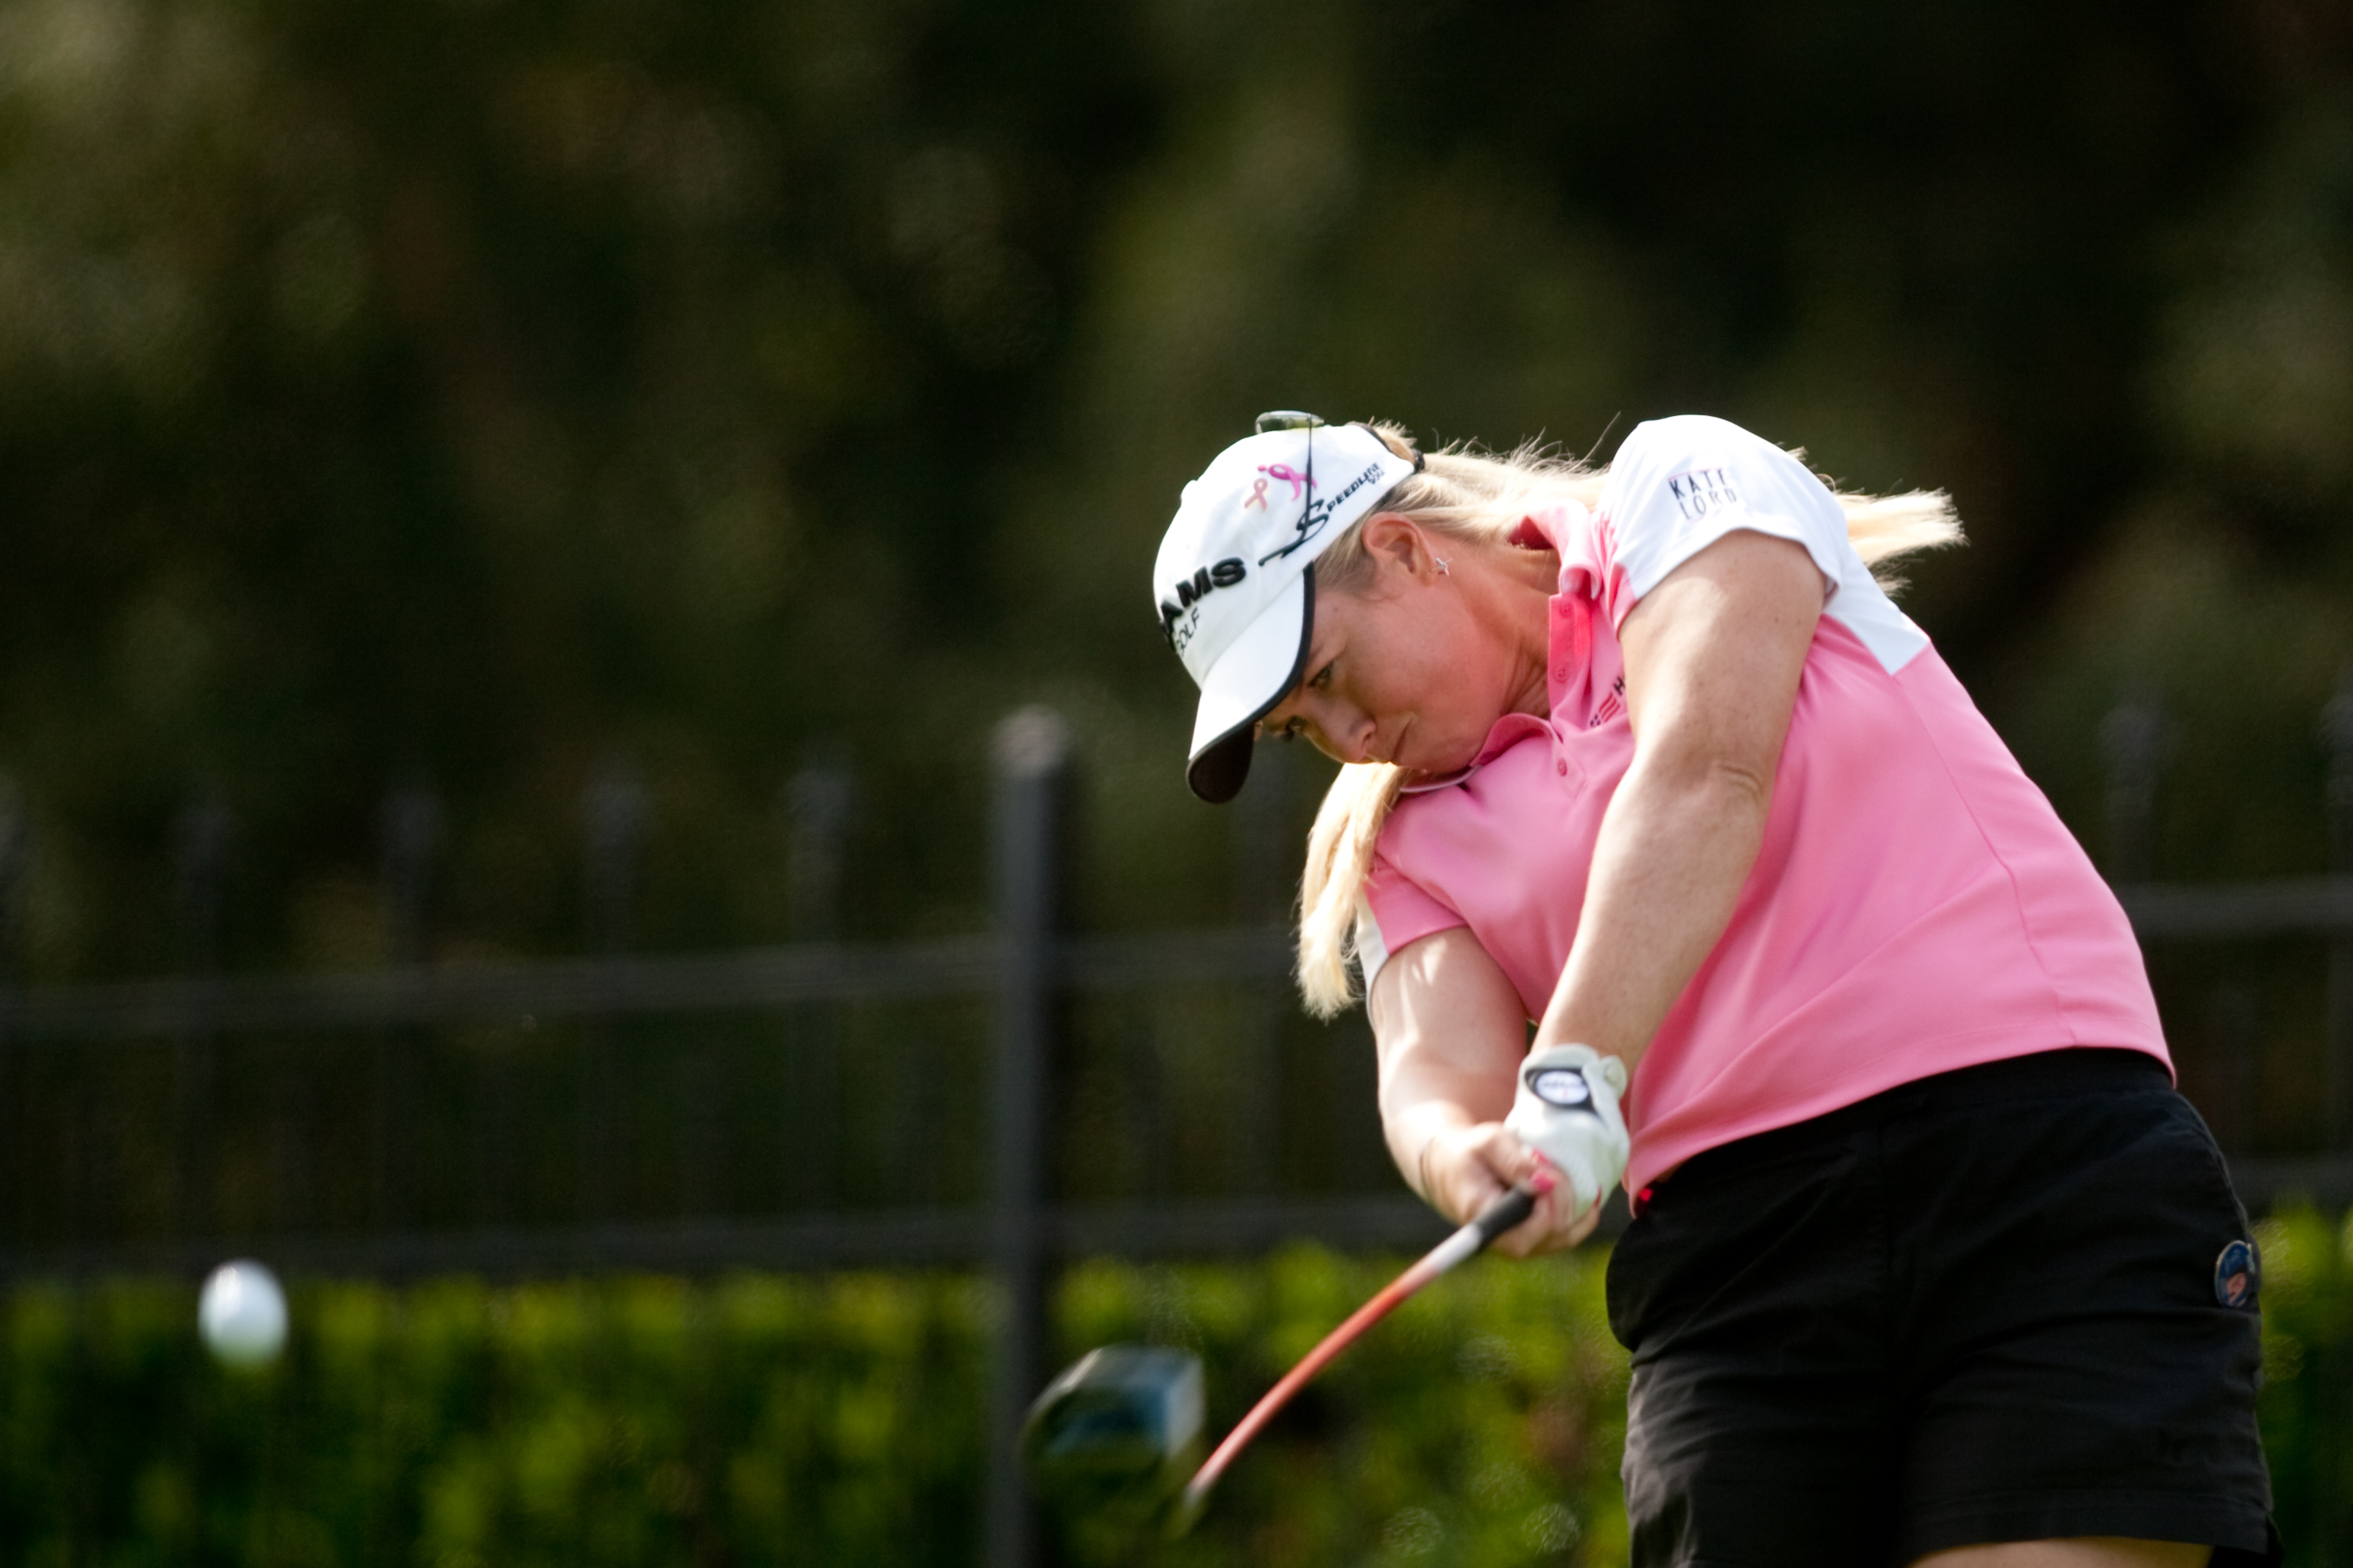 DANVILLE, CA - OCTOBER 16: Brittany Lincicome follows through on a tee shot during the third round of the CVS/Pharmacy LPGA Challenge at Blackhawk Country Club on October 16, 2010 in Danville, California. (Photo by Darren Carroll/Getty Images)